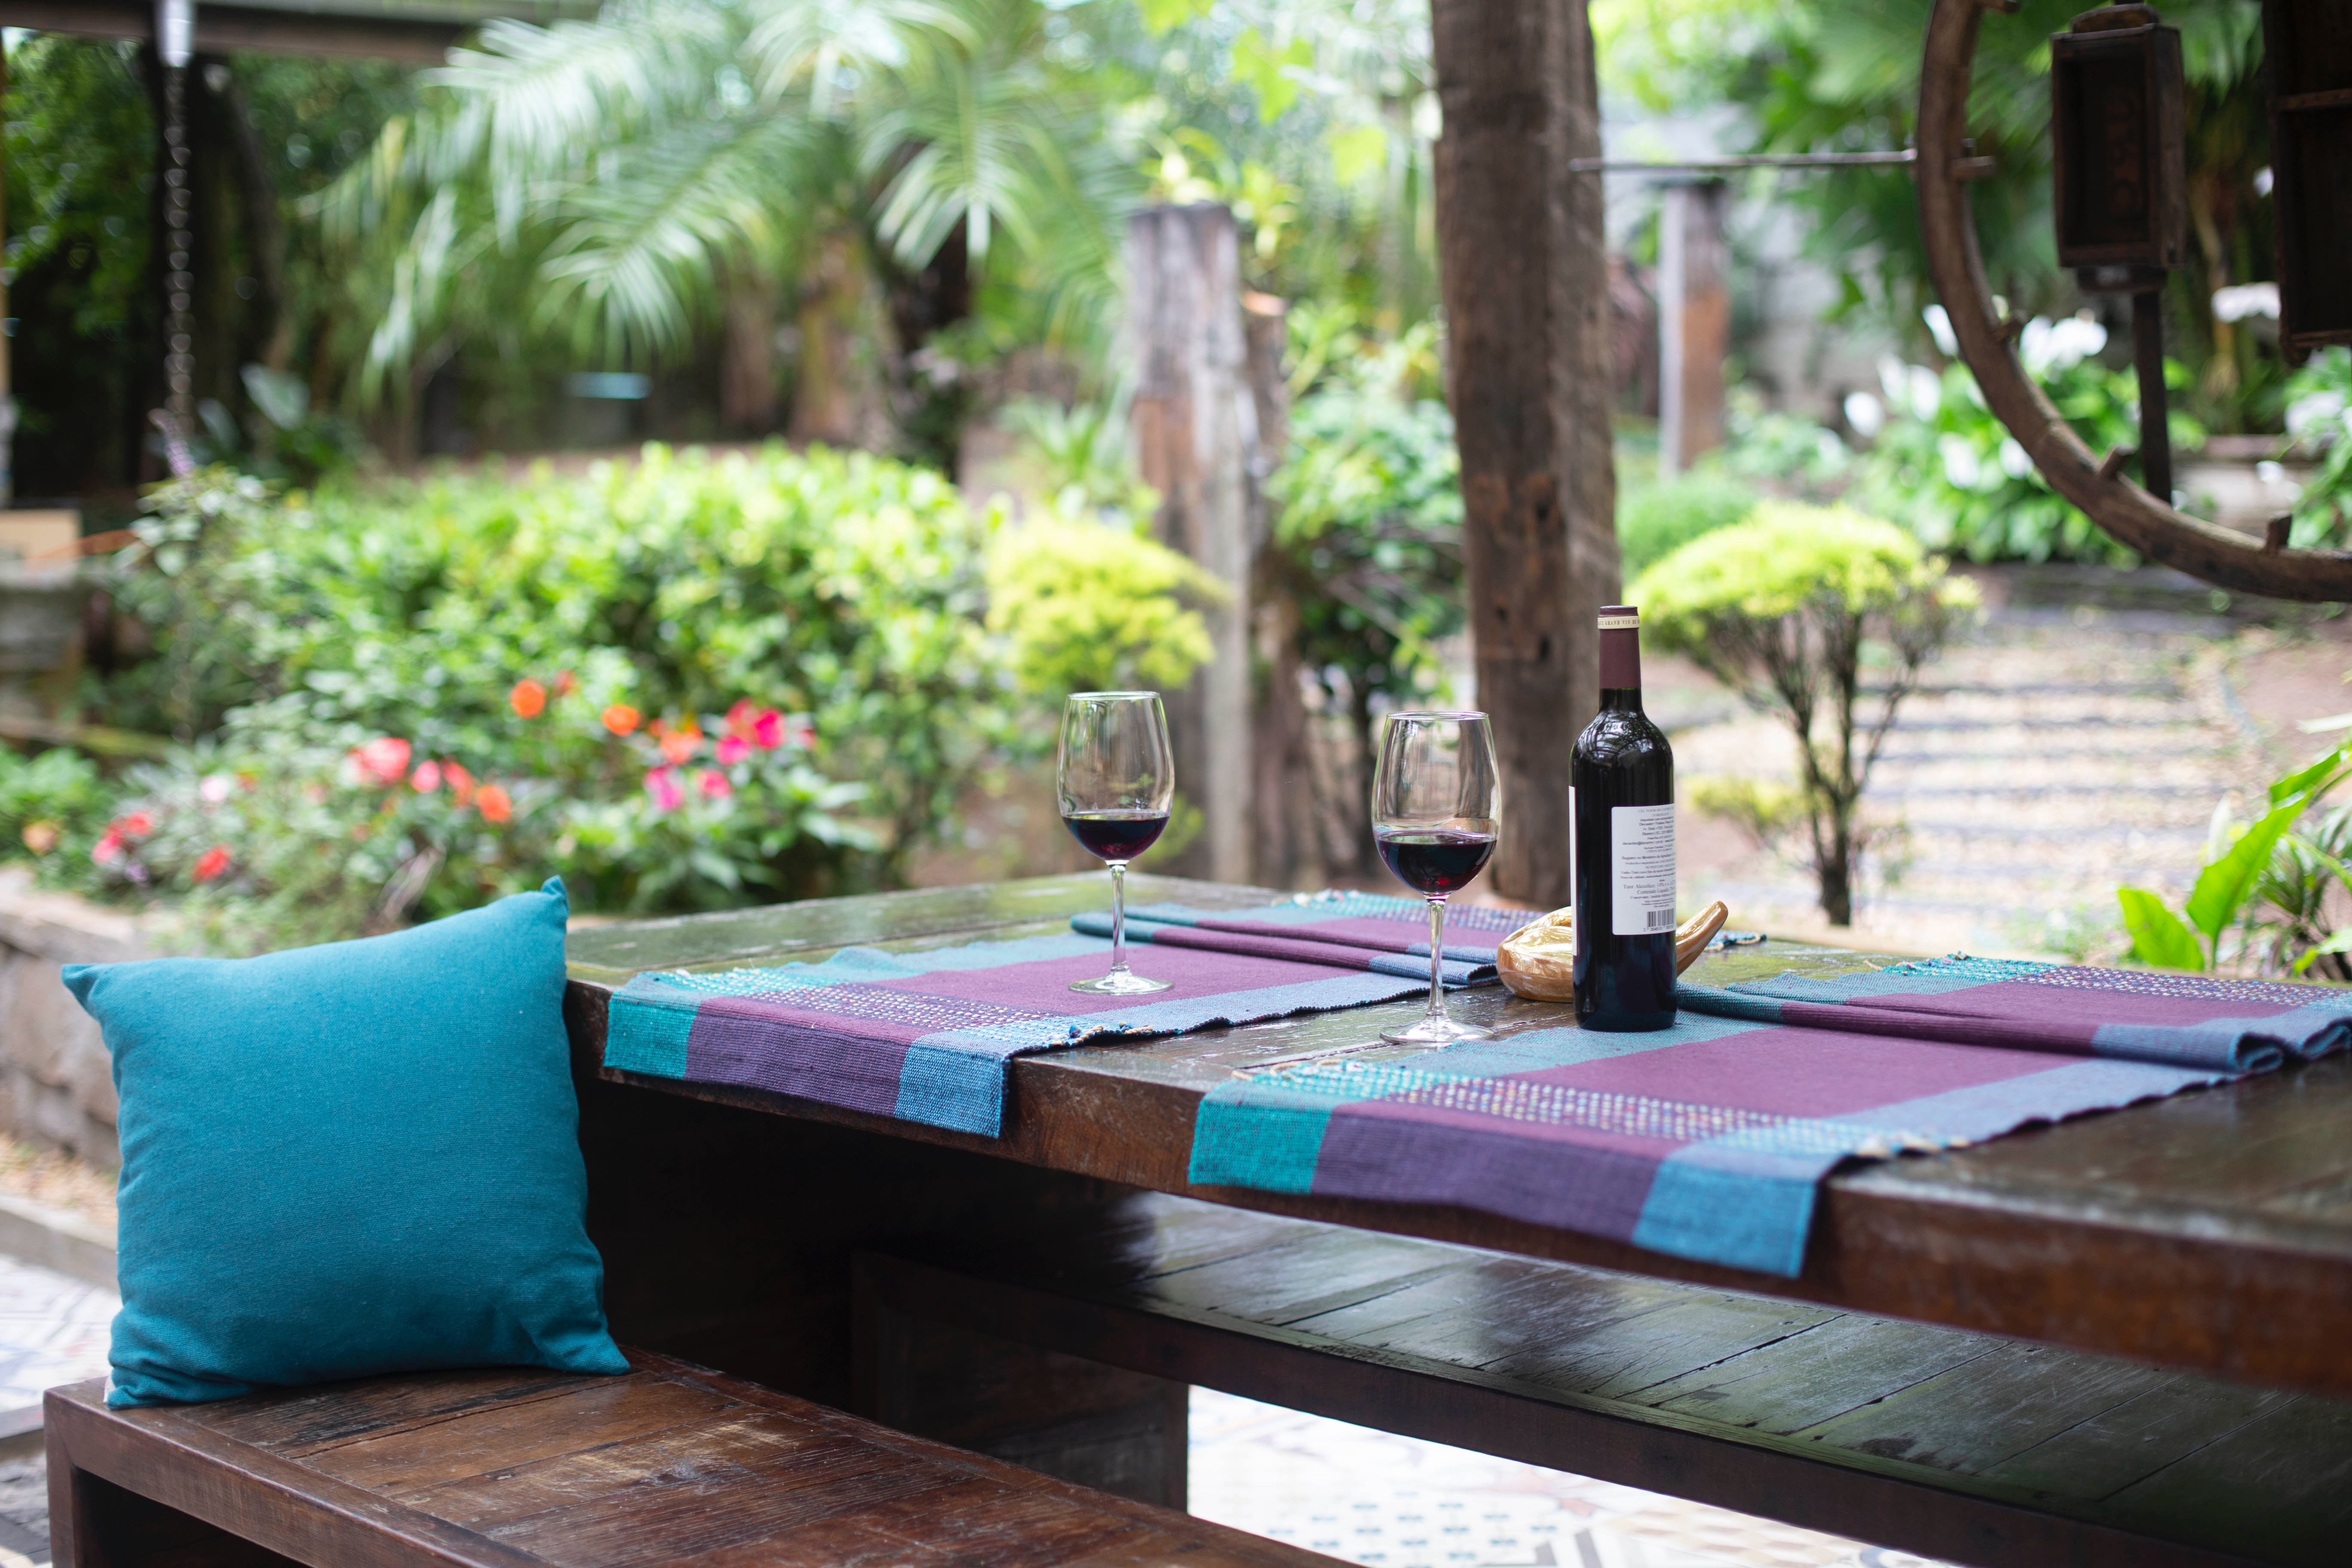 Top Tips For Cleaning Your Garden Furniture